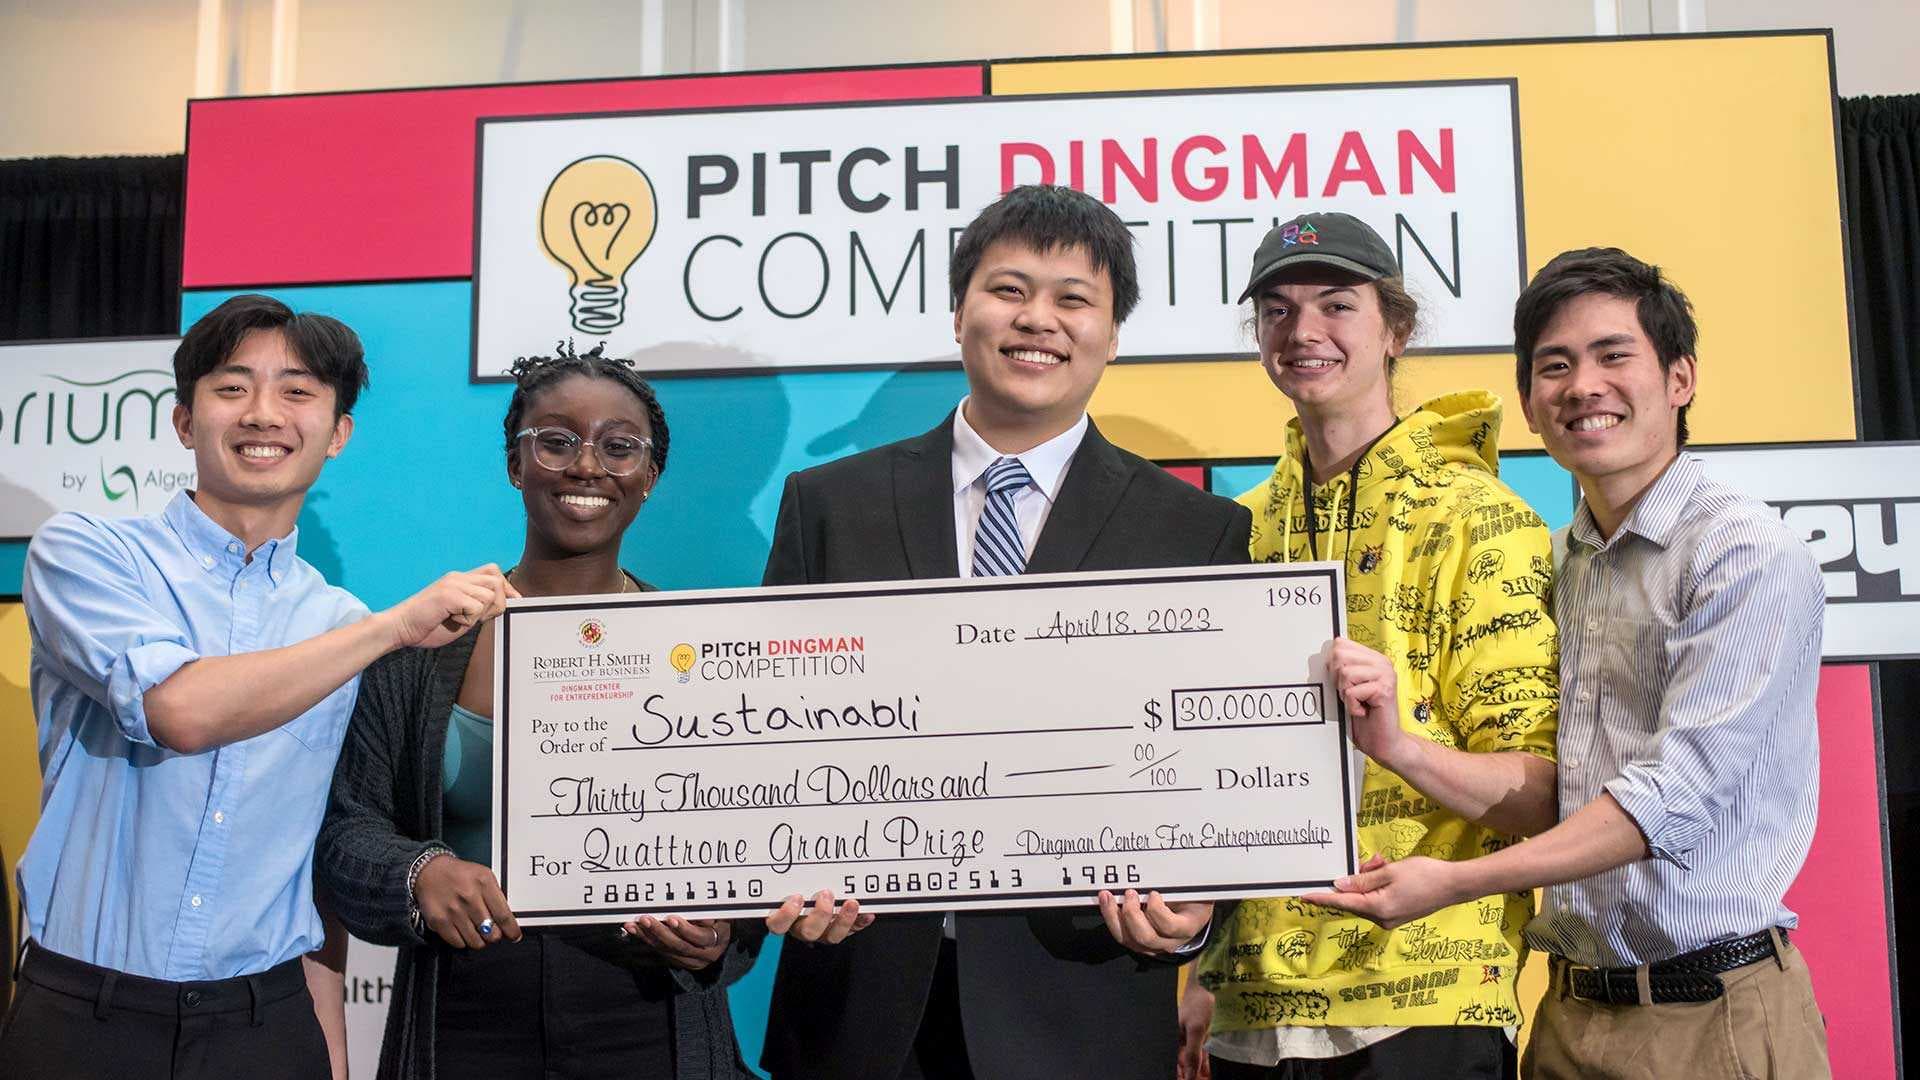 Students hold up big check made out to Sustainabli at Pitch Dingman competition